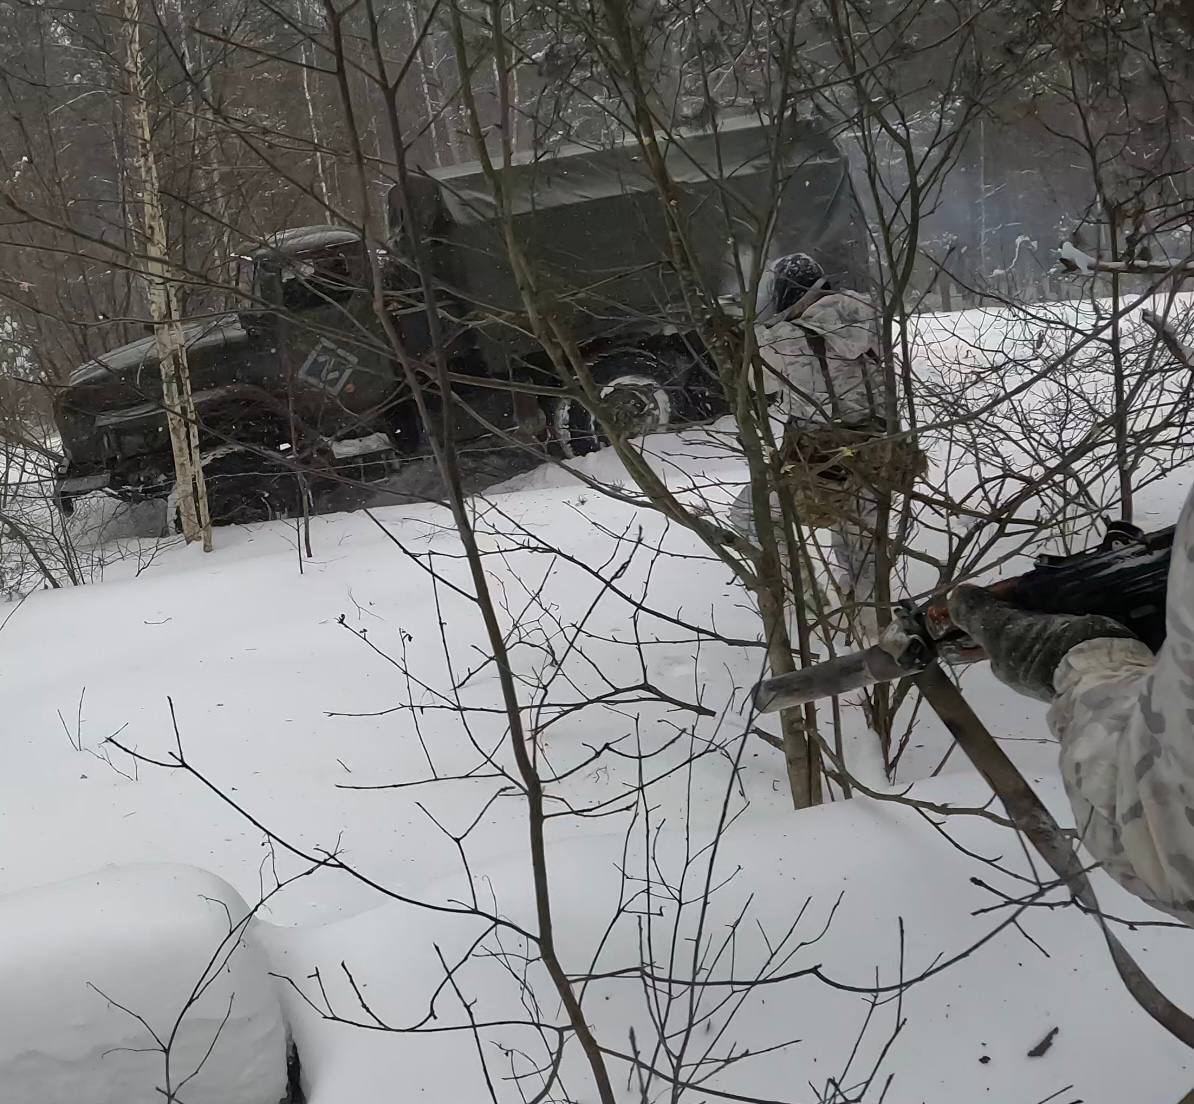 Fighters of the Russian Volunteer Corps set up an ambush on the transport of Russian military in the Bryansk region, resulting in casualties among the enemy forces. Photo